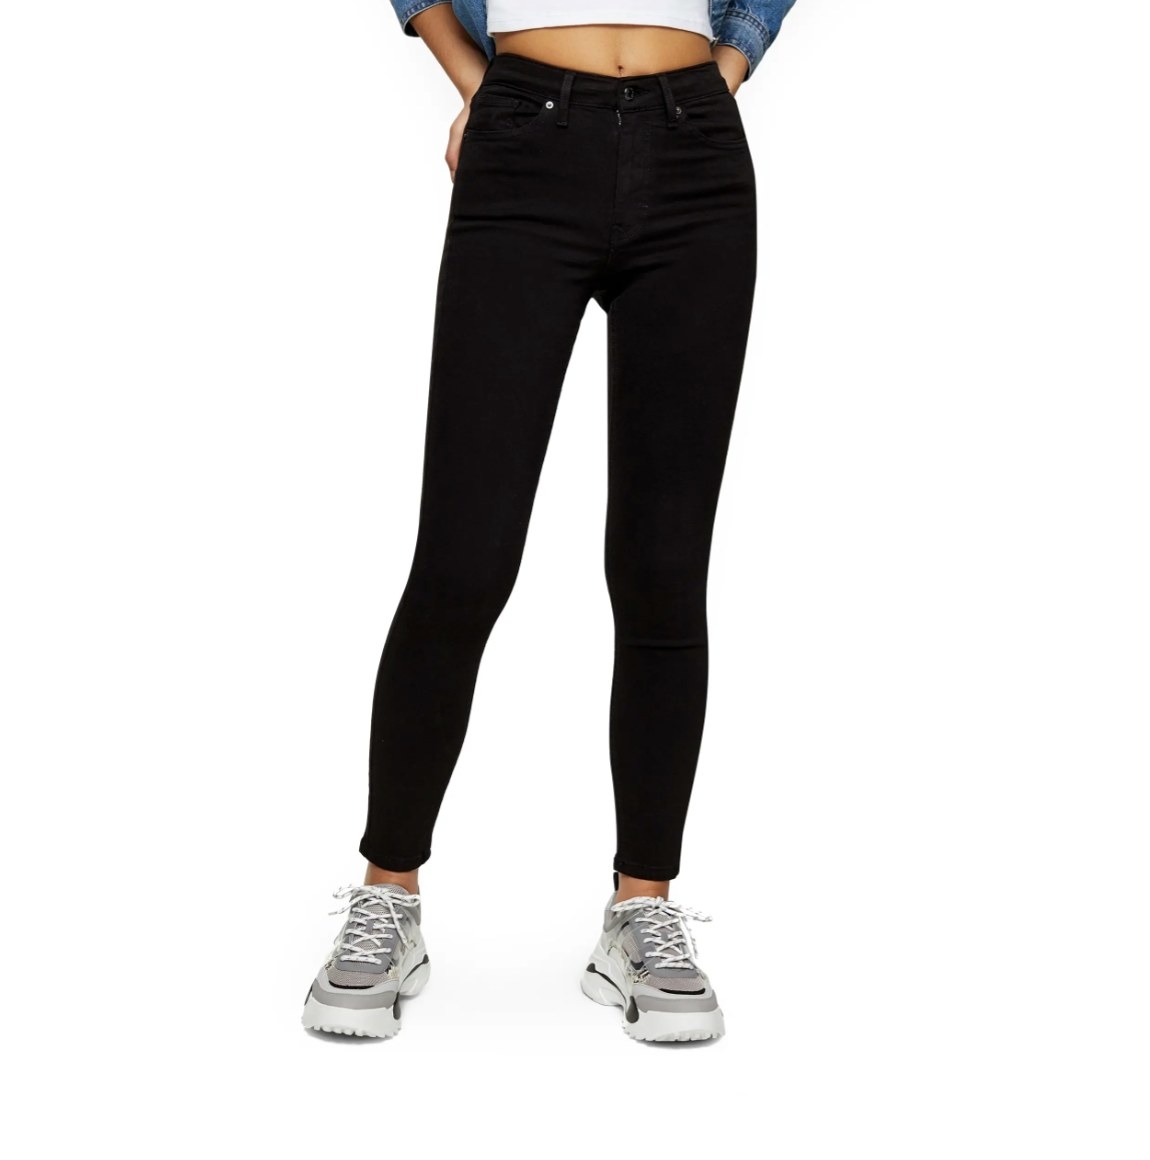 The pair of high waisted jeans in black